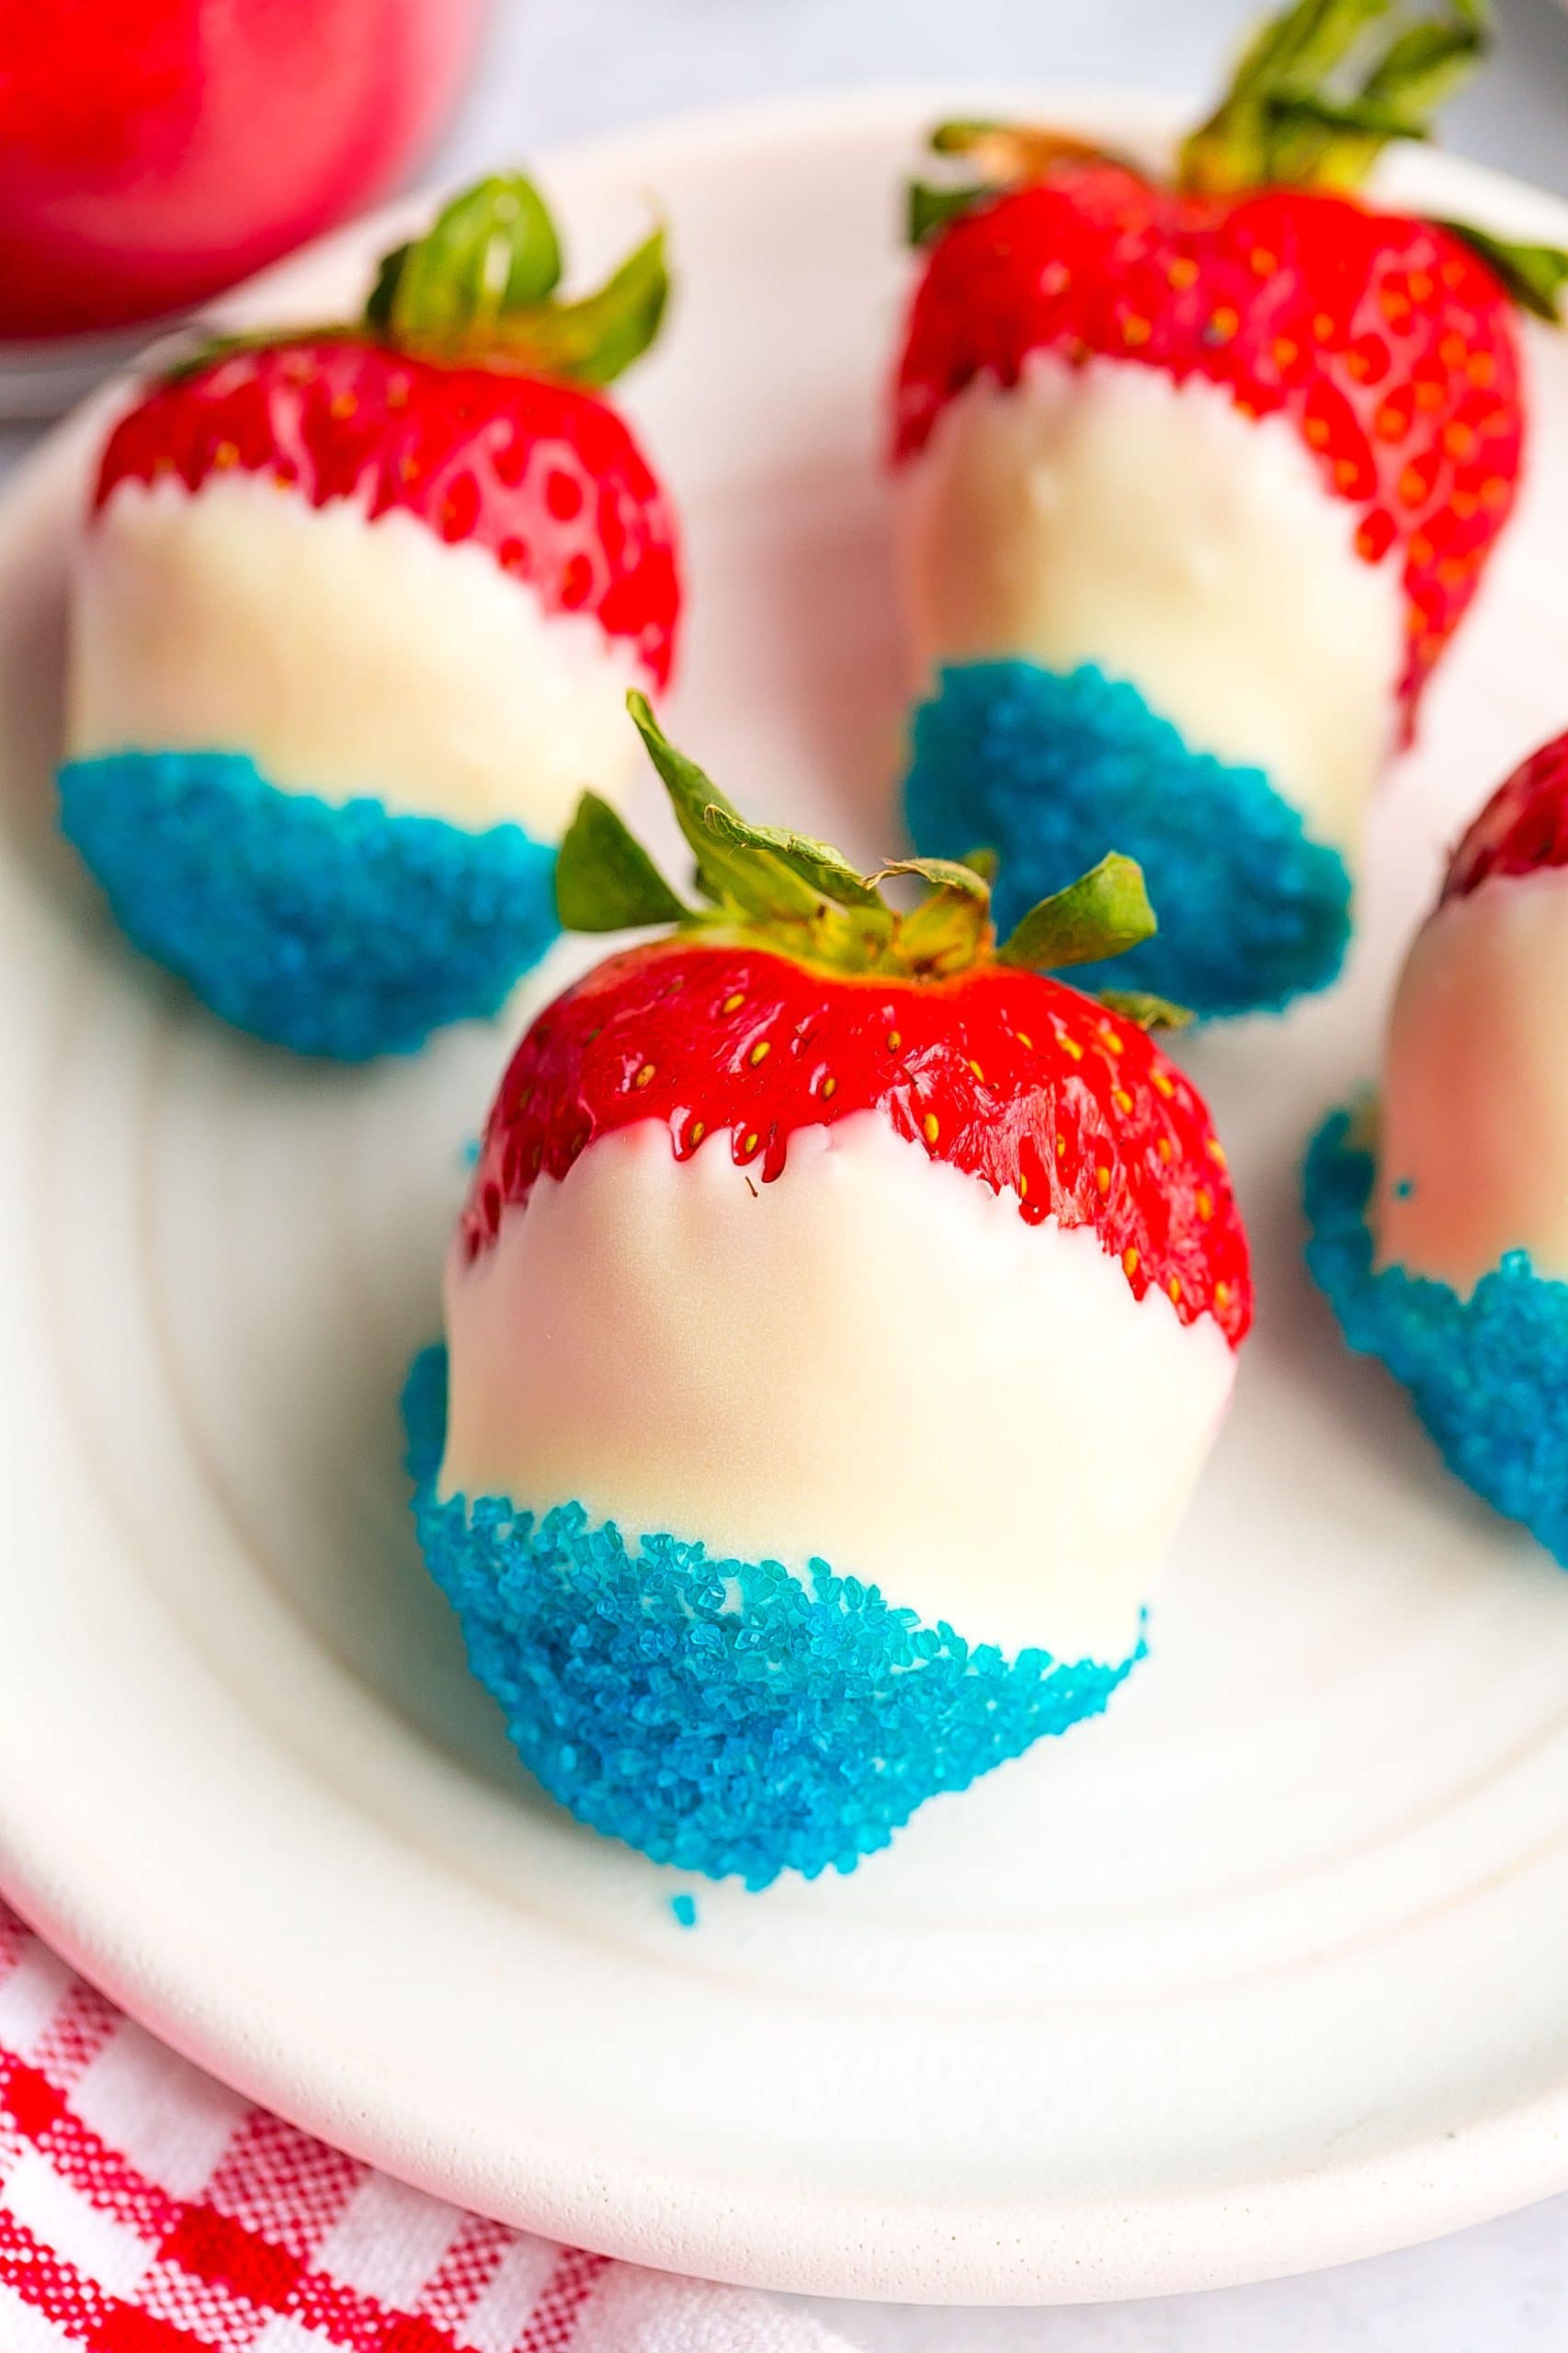 Strawberry coated in a white chocolate and blue sprinkles.